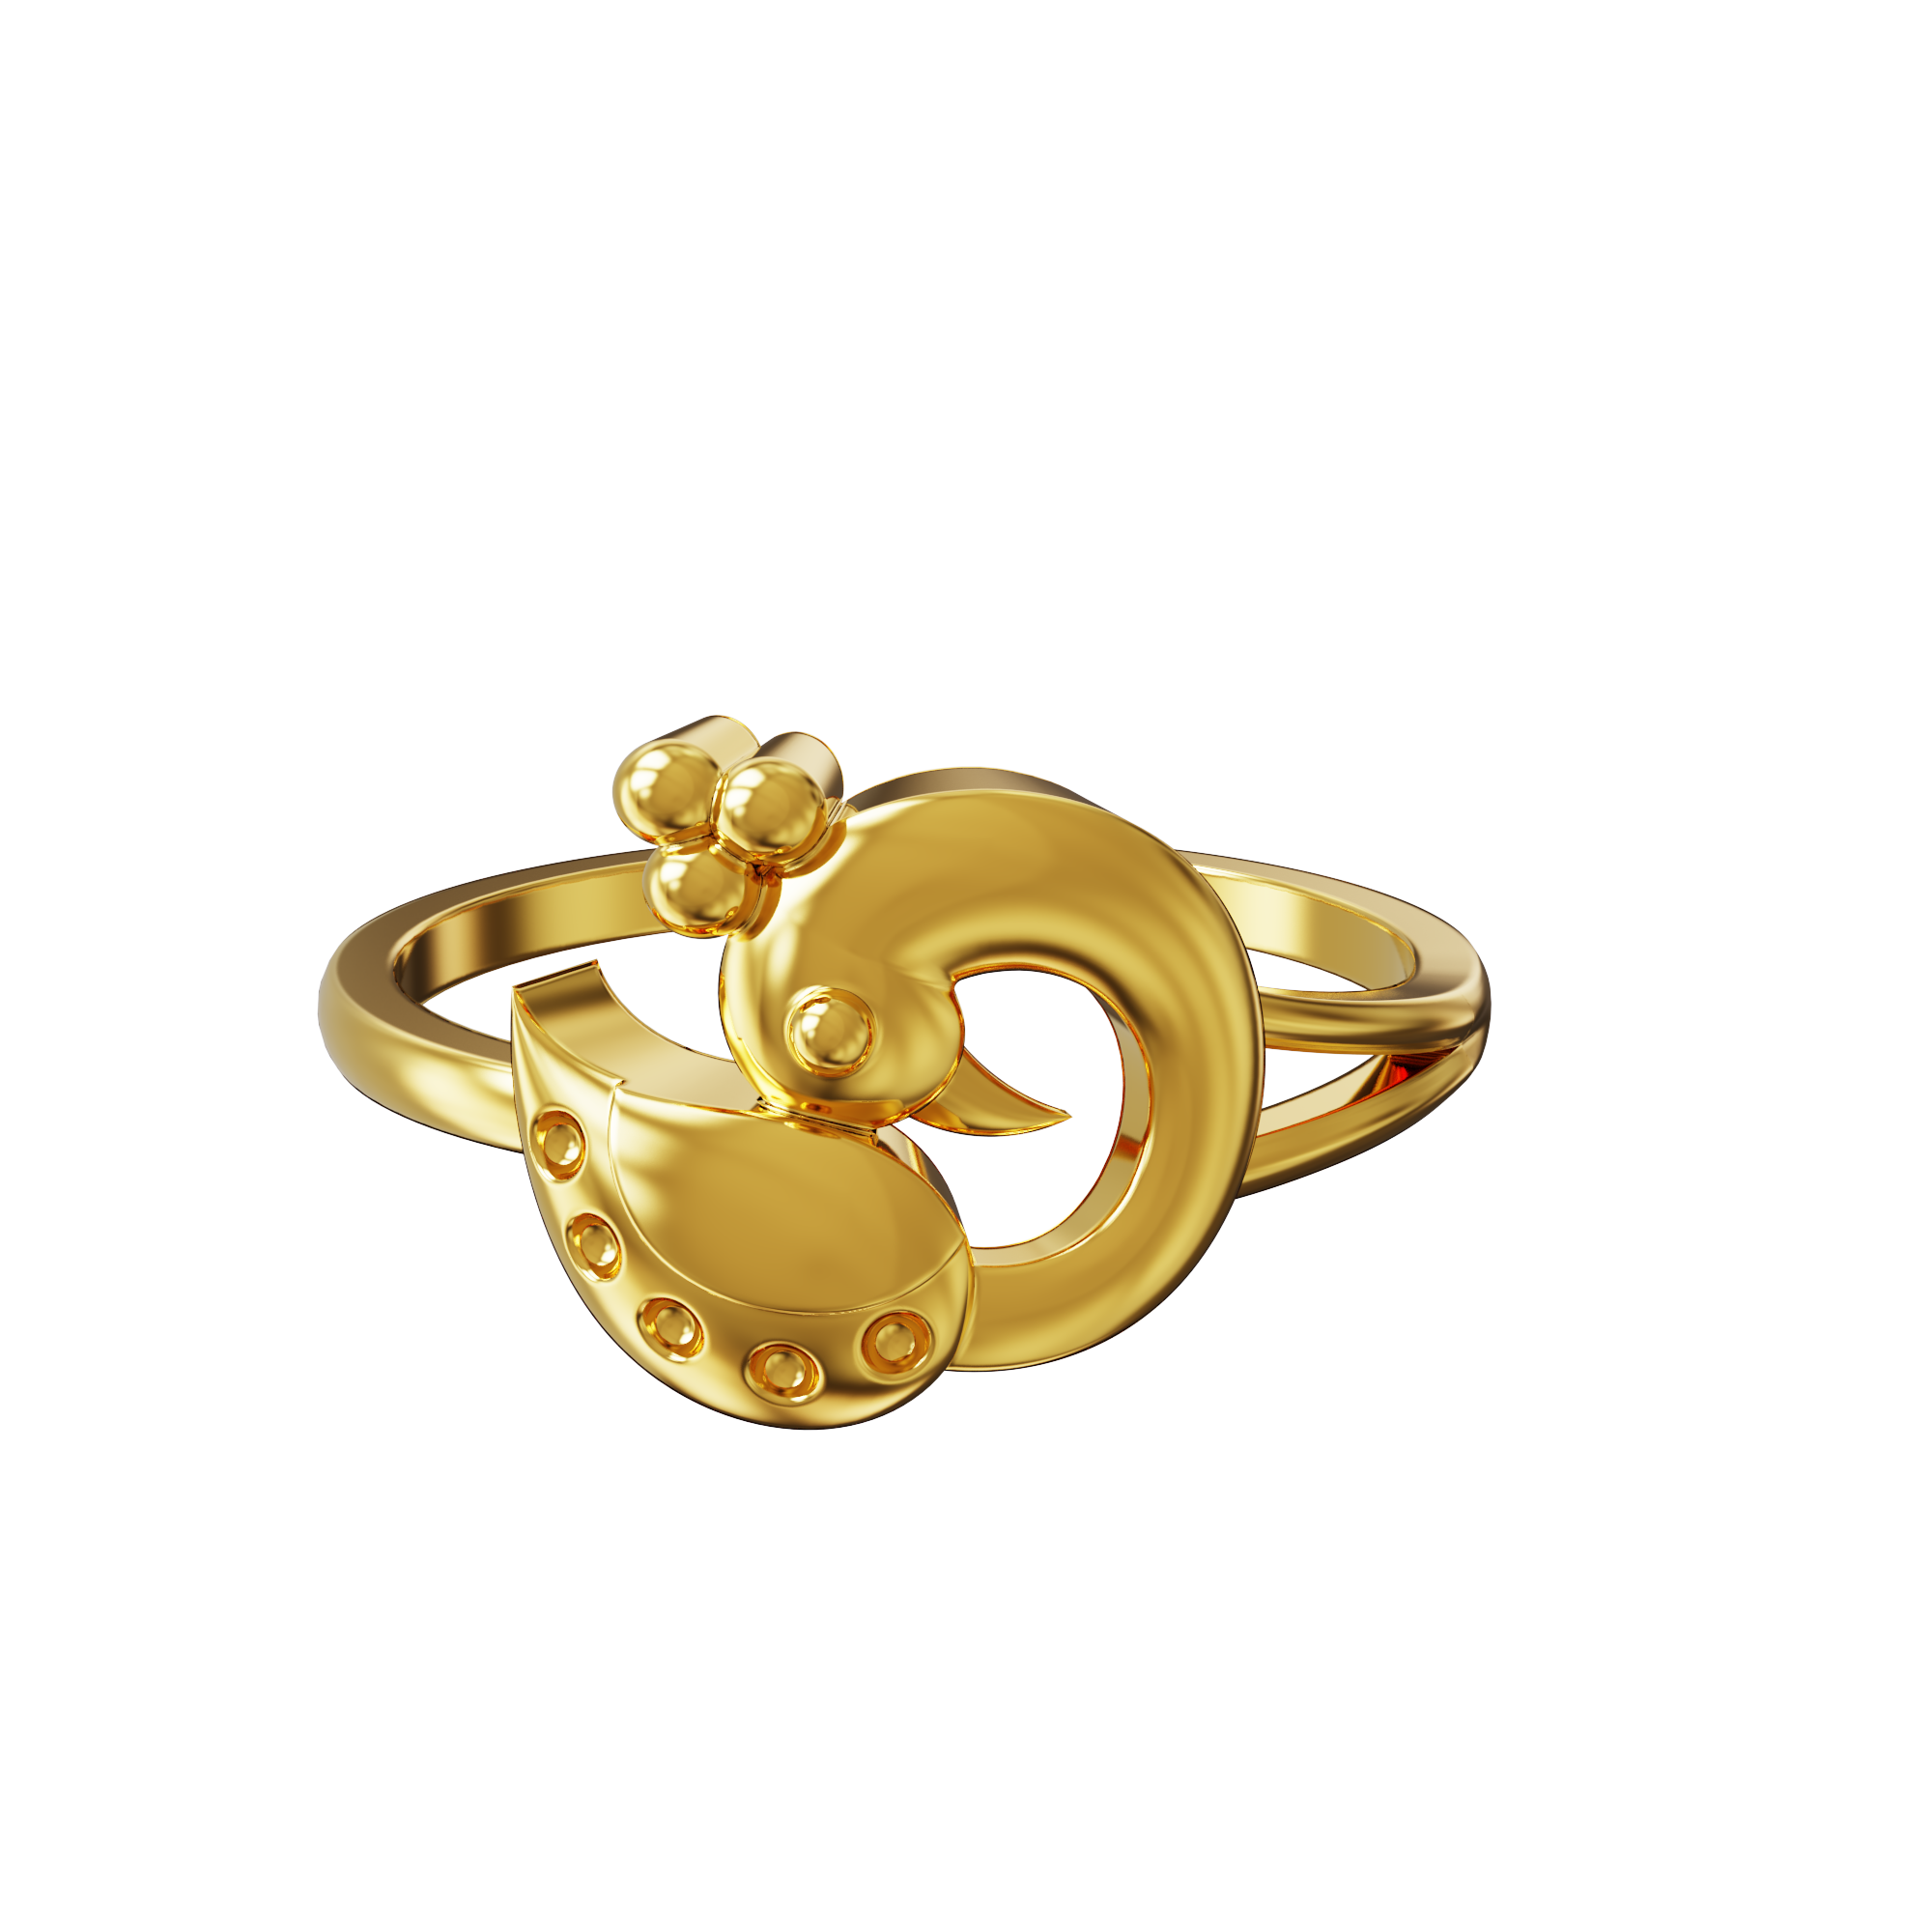 Peacock Gold Ring, Womens Real Gold Ring, Hallmarked 18k Yellow Gold,  Birthday Gift for Wife, Peacock Bird Ring, Tiny Gold Ring, Womens Ring -  Etsy